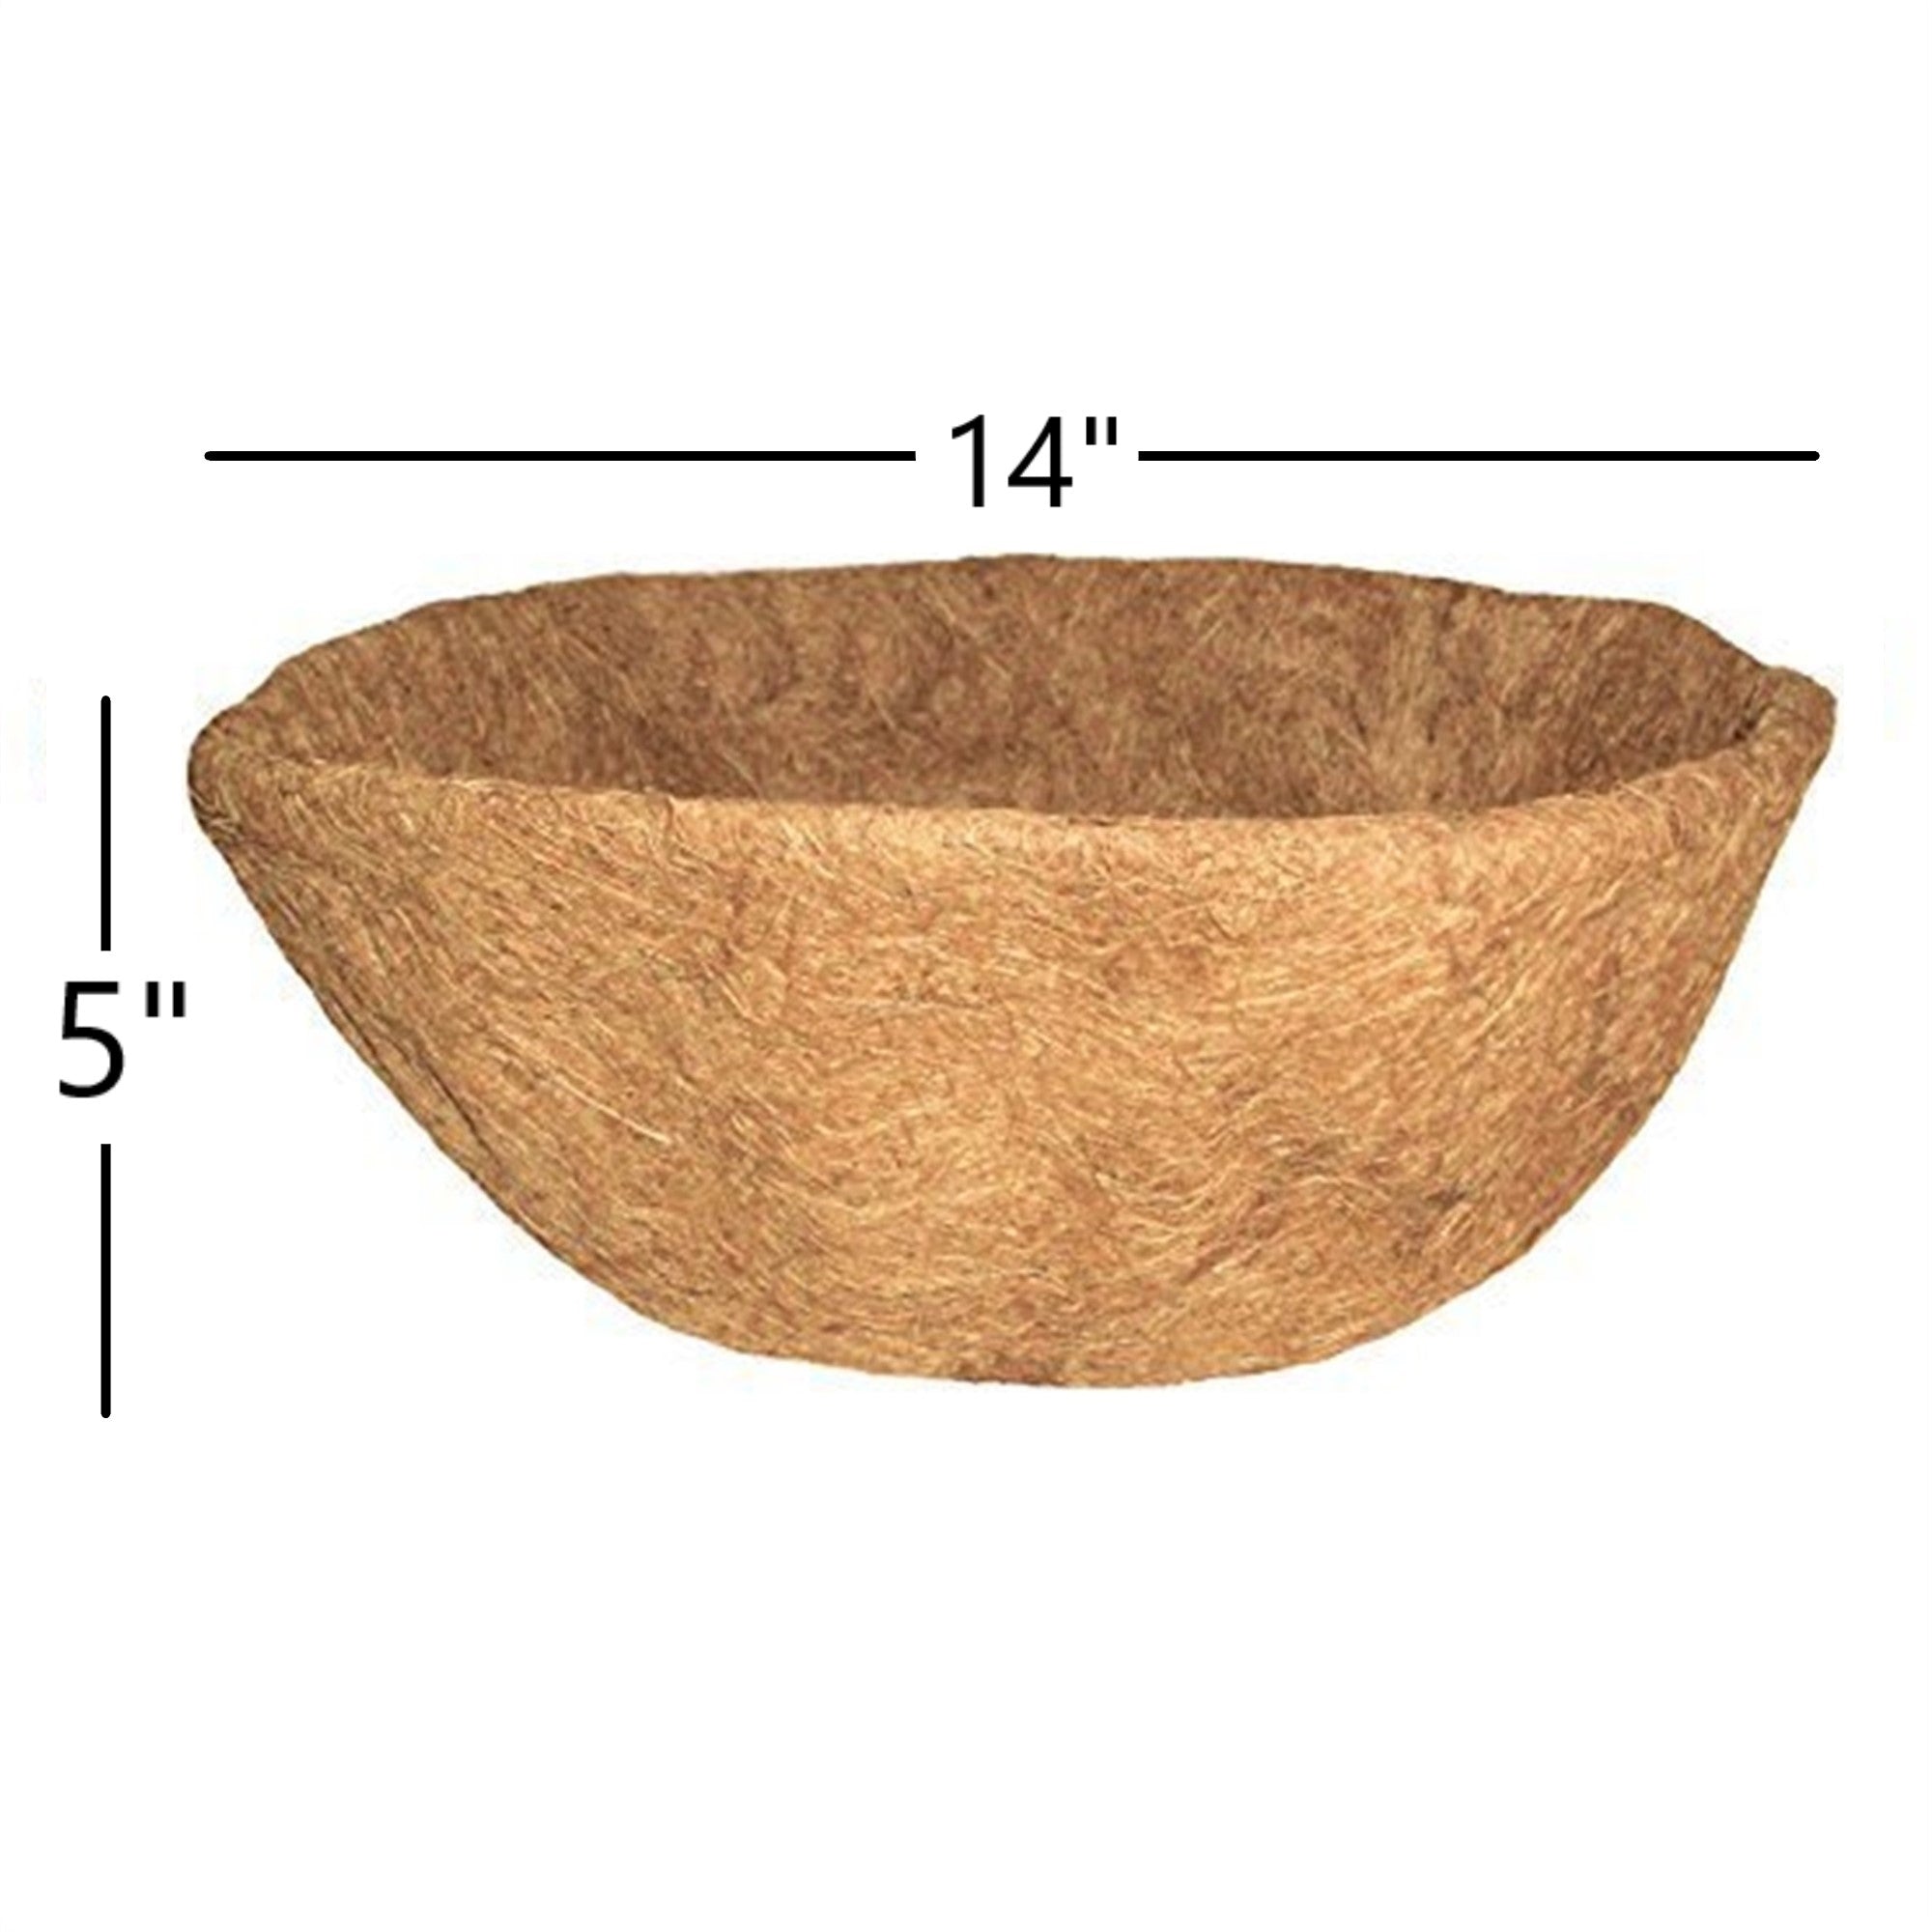 Grower Select Source Skill Coconut Arts Growers Select Basket Shape Coco Liner, 14 inches